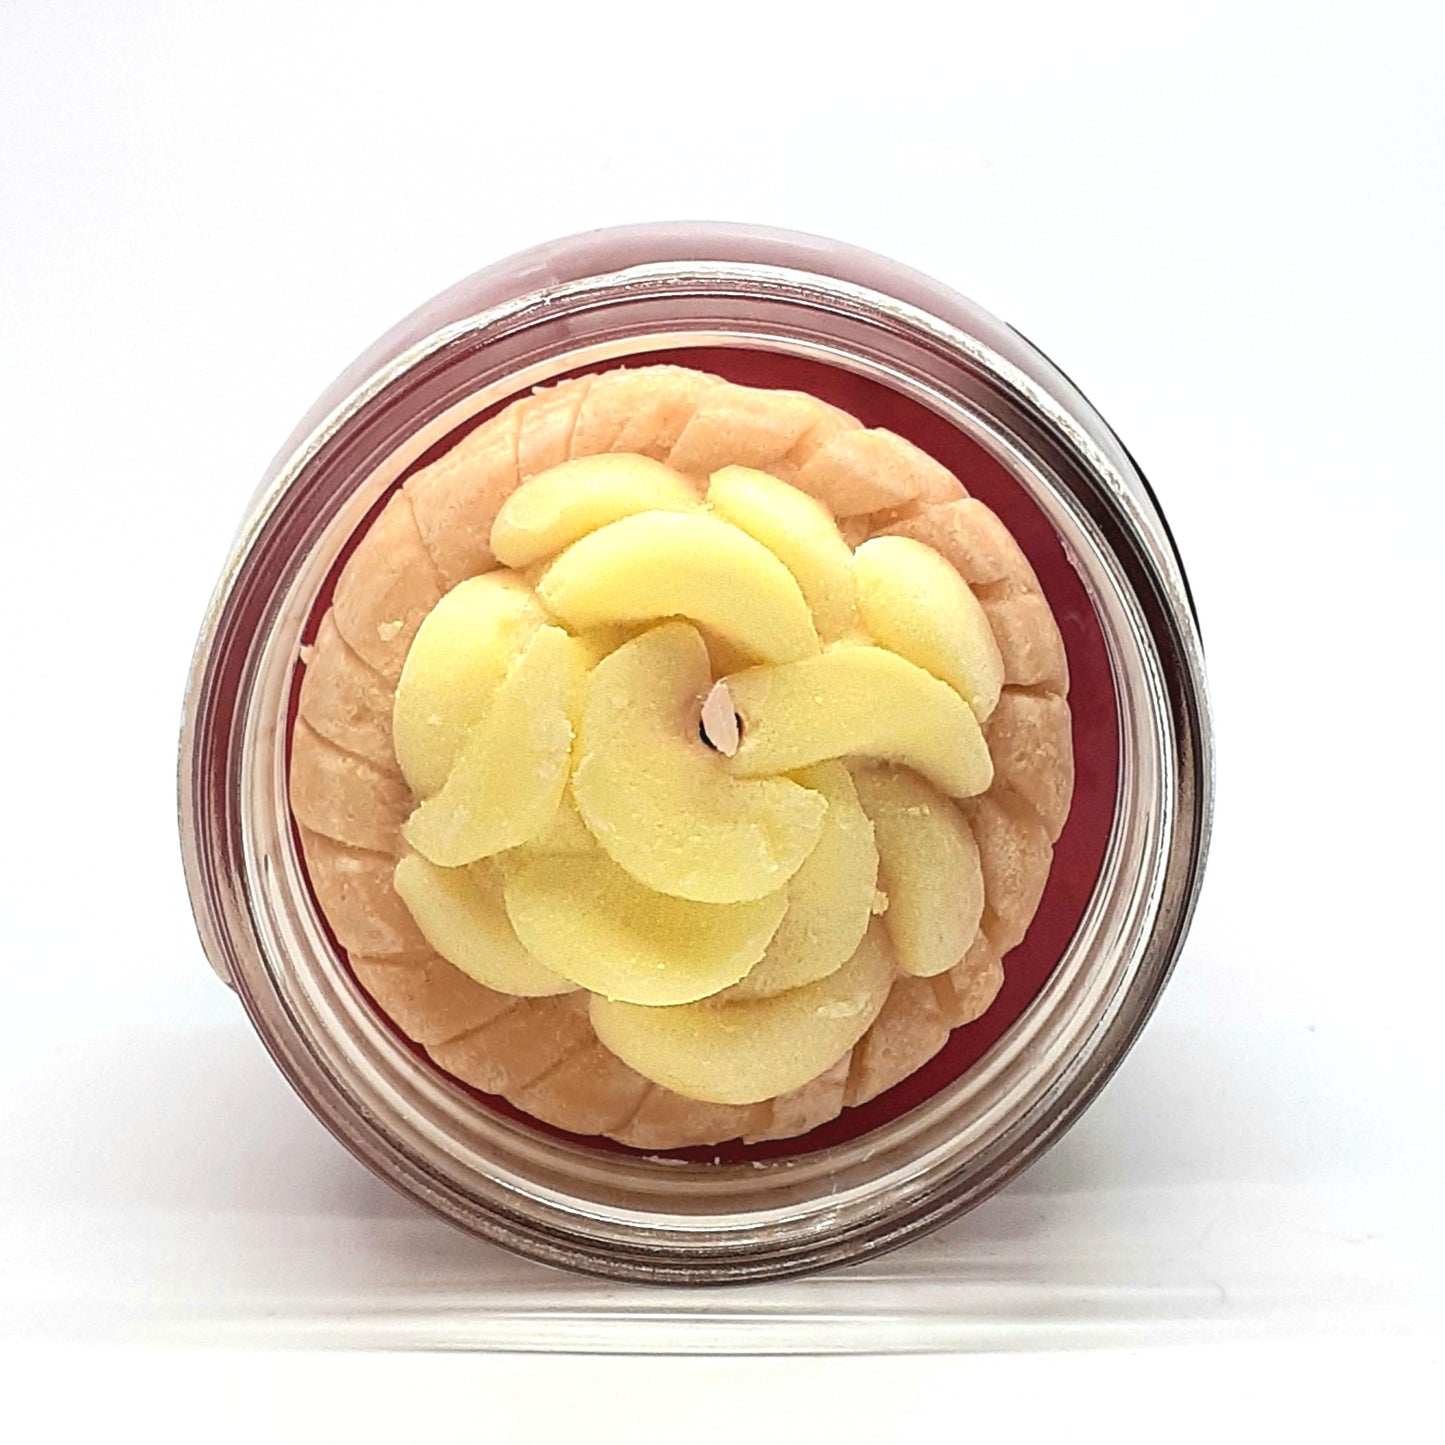 Apple Pie Candle